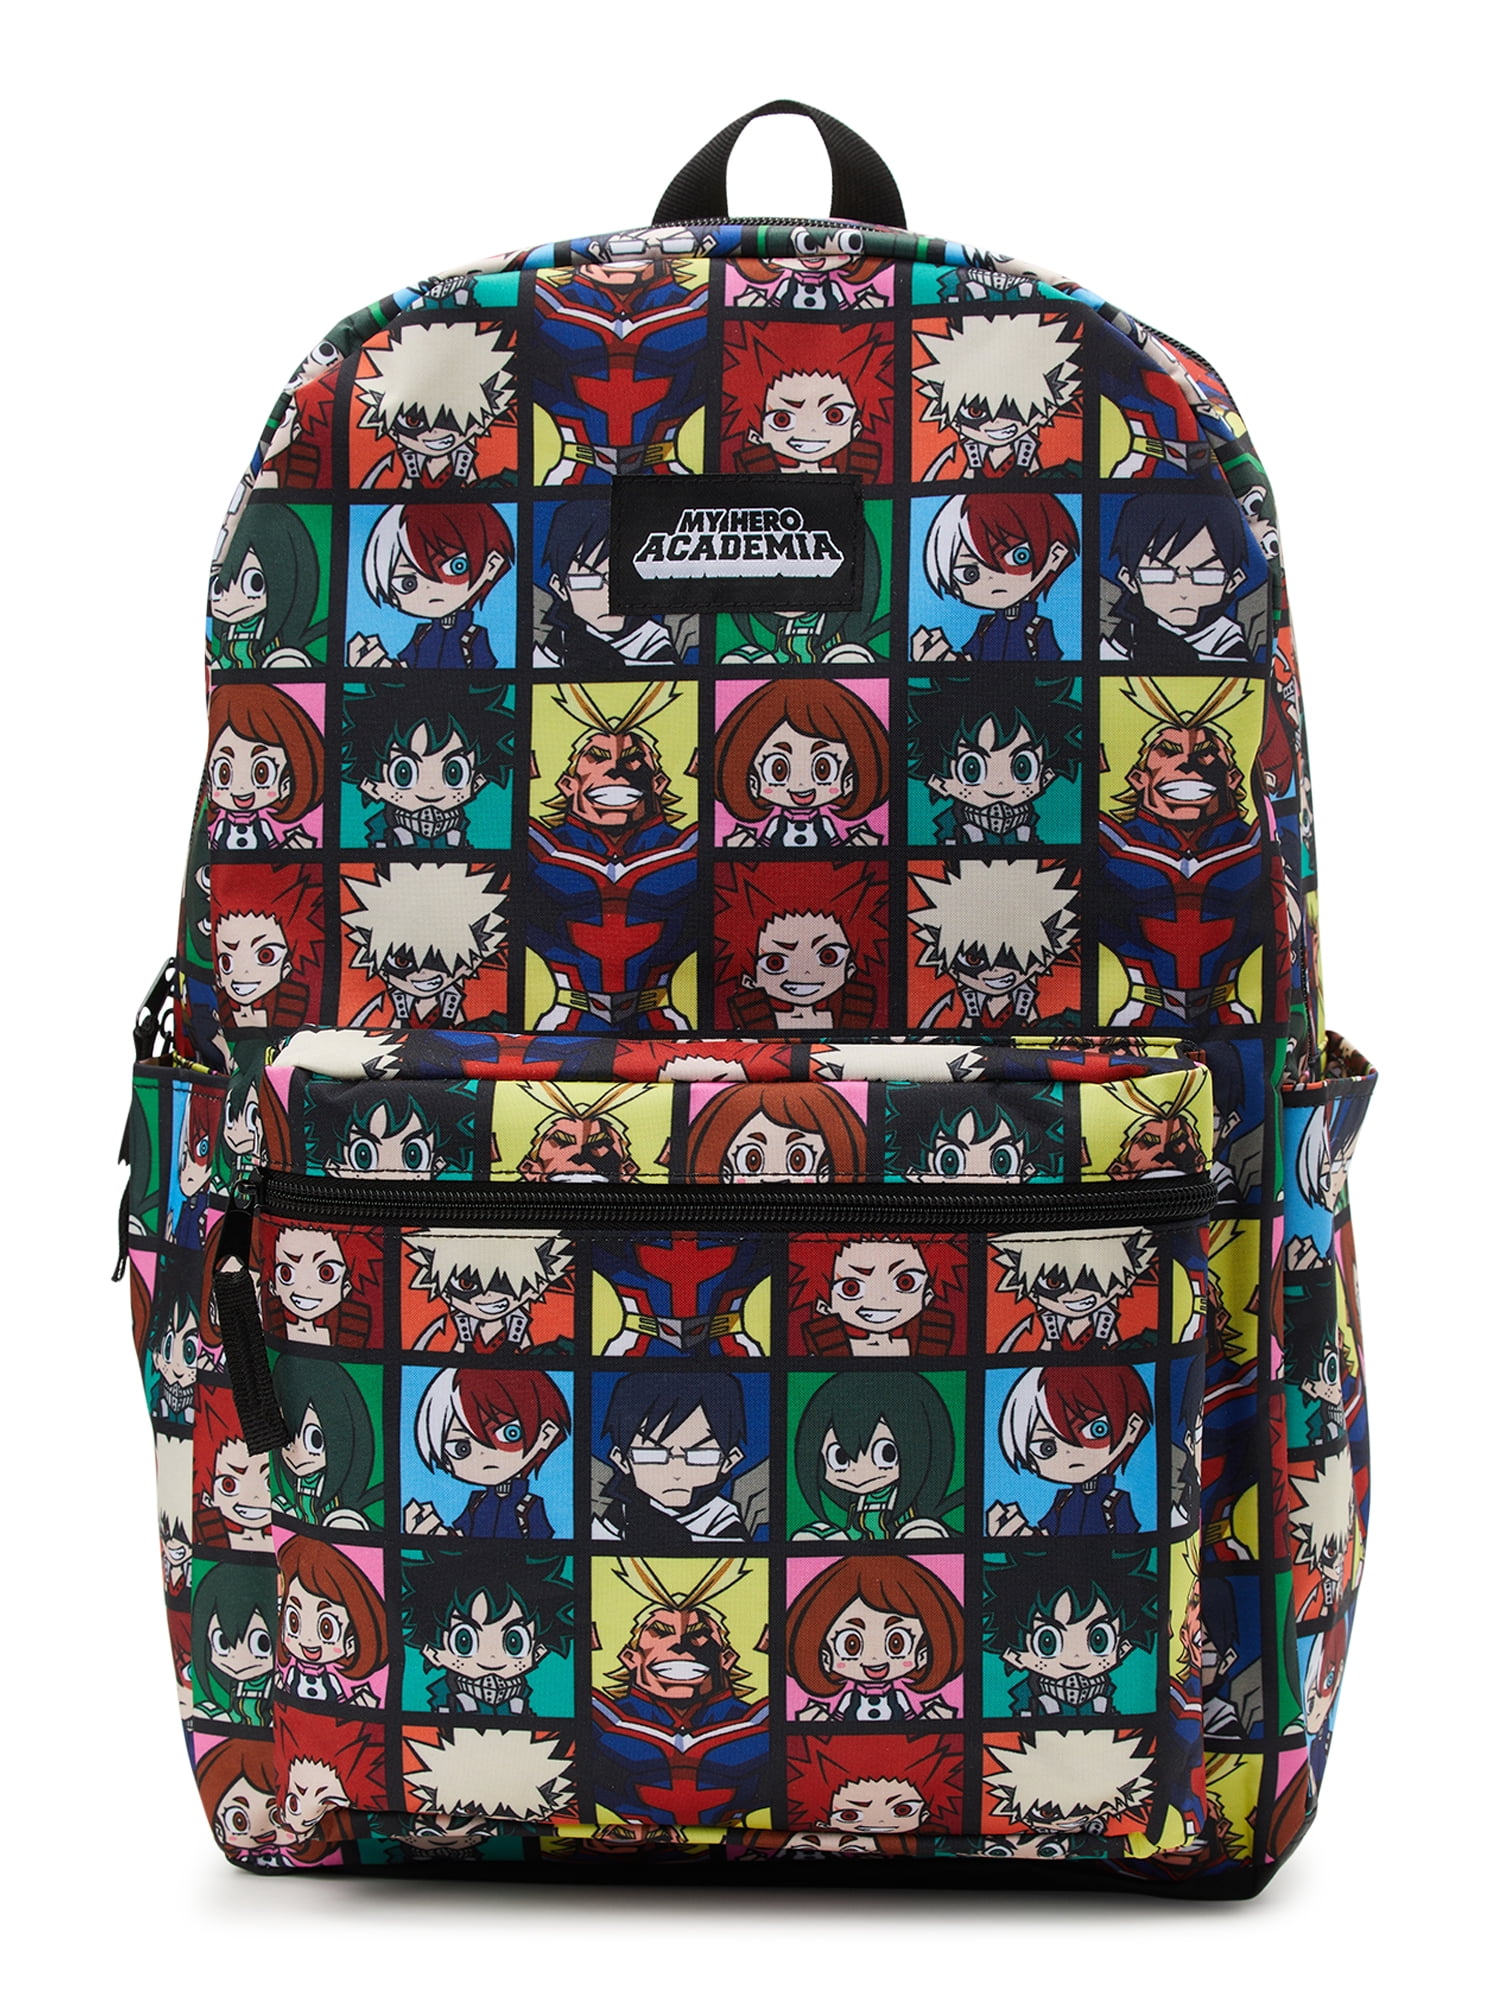 Loungefly Backpacks | Loungefly Bags & Accessories | Pop Figures